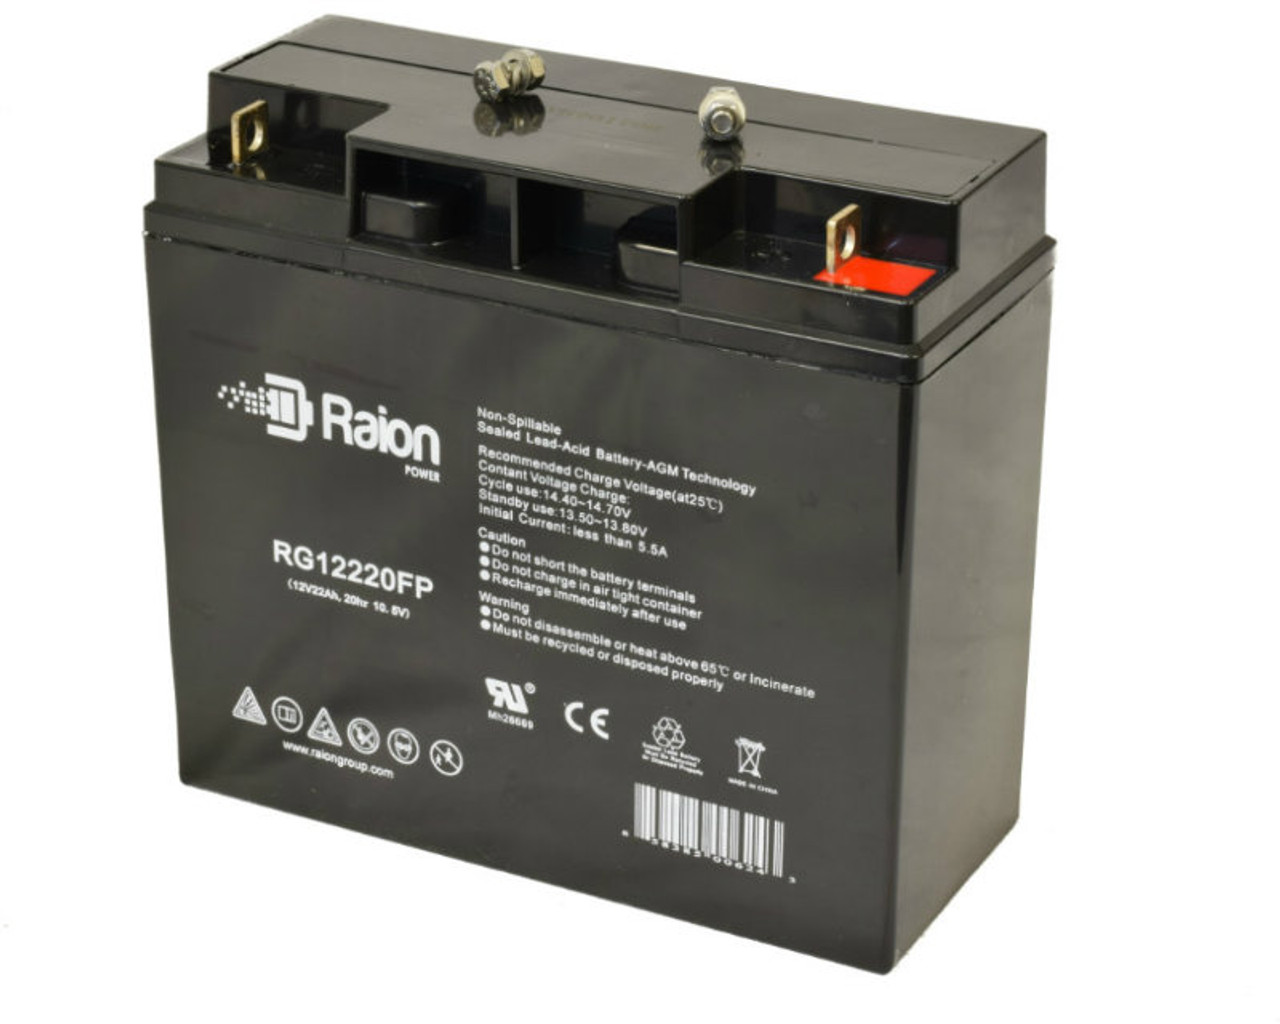 Raion Power RG12220FP 12V 22Ah Lead Acid Battery for Mongoose Fusion Scooter